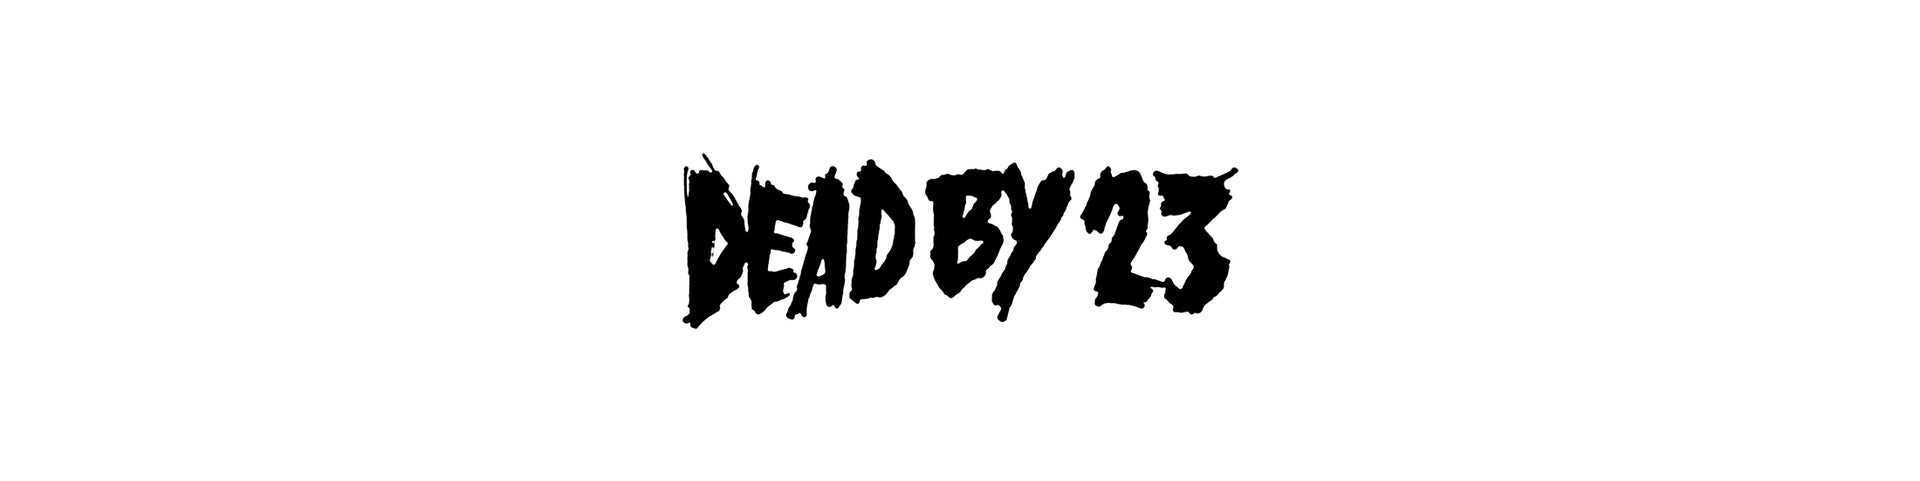 Shop – Dead By 23 Records – Band & Music Merch – Cold Cuts Merch